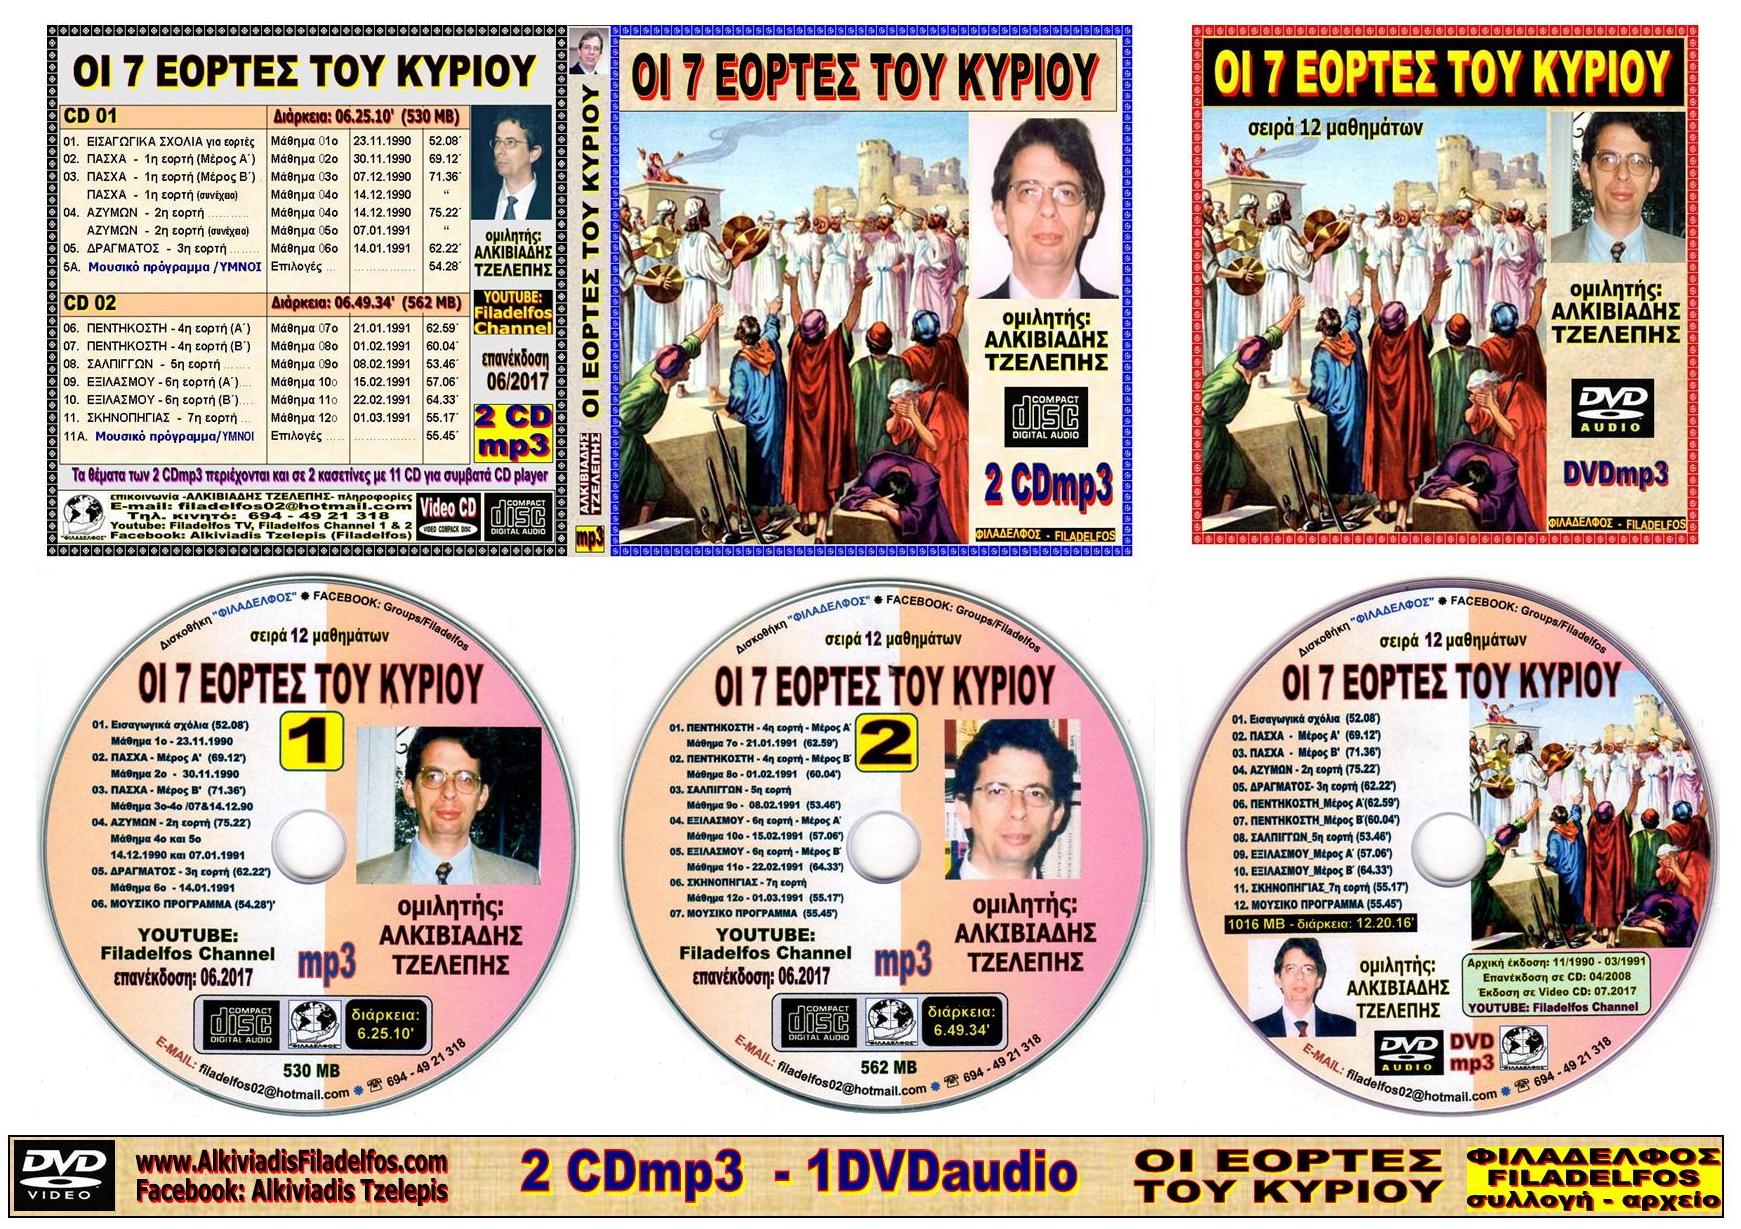 EOPTES TOY KYPIOY VideoCD